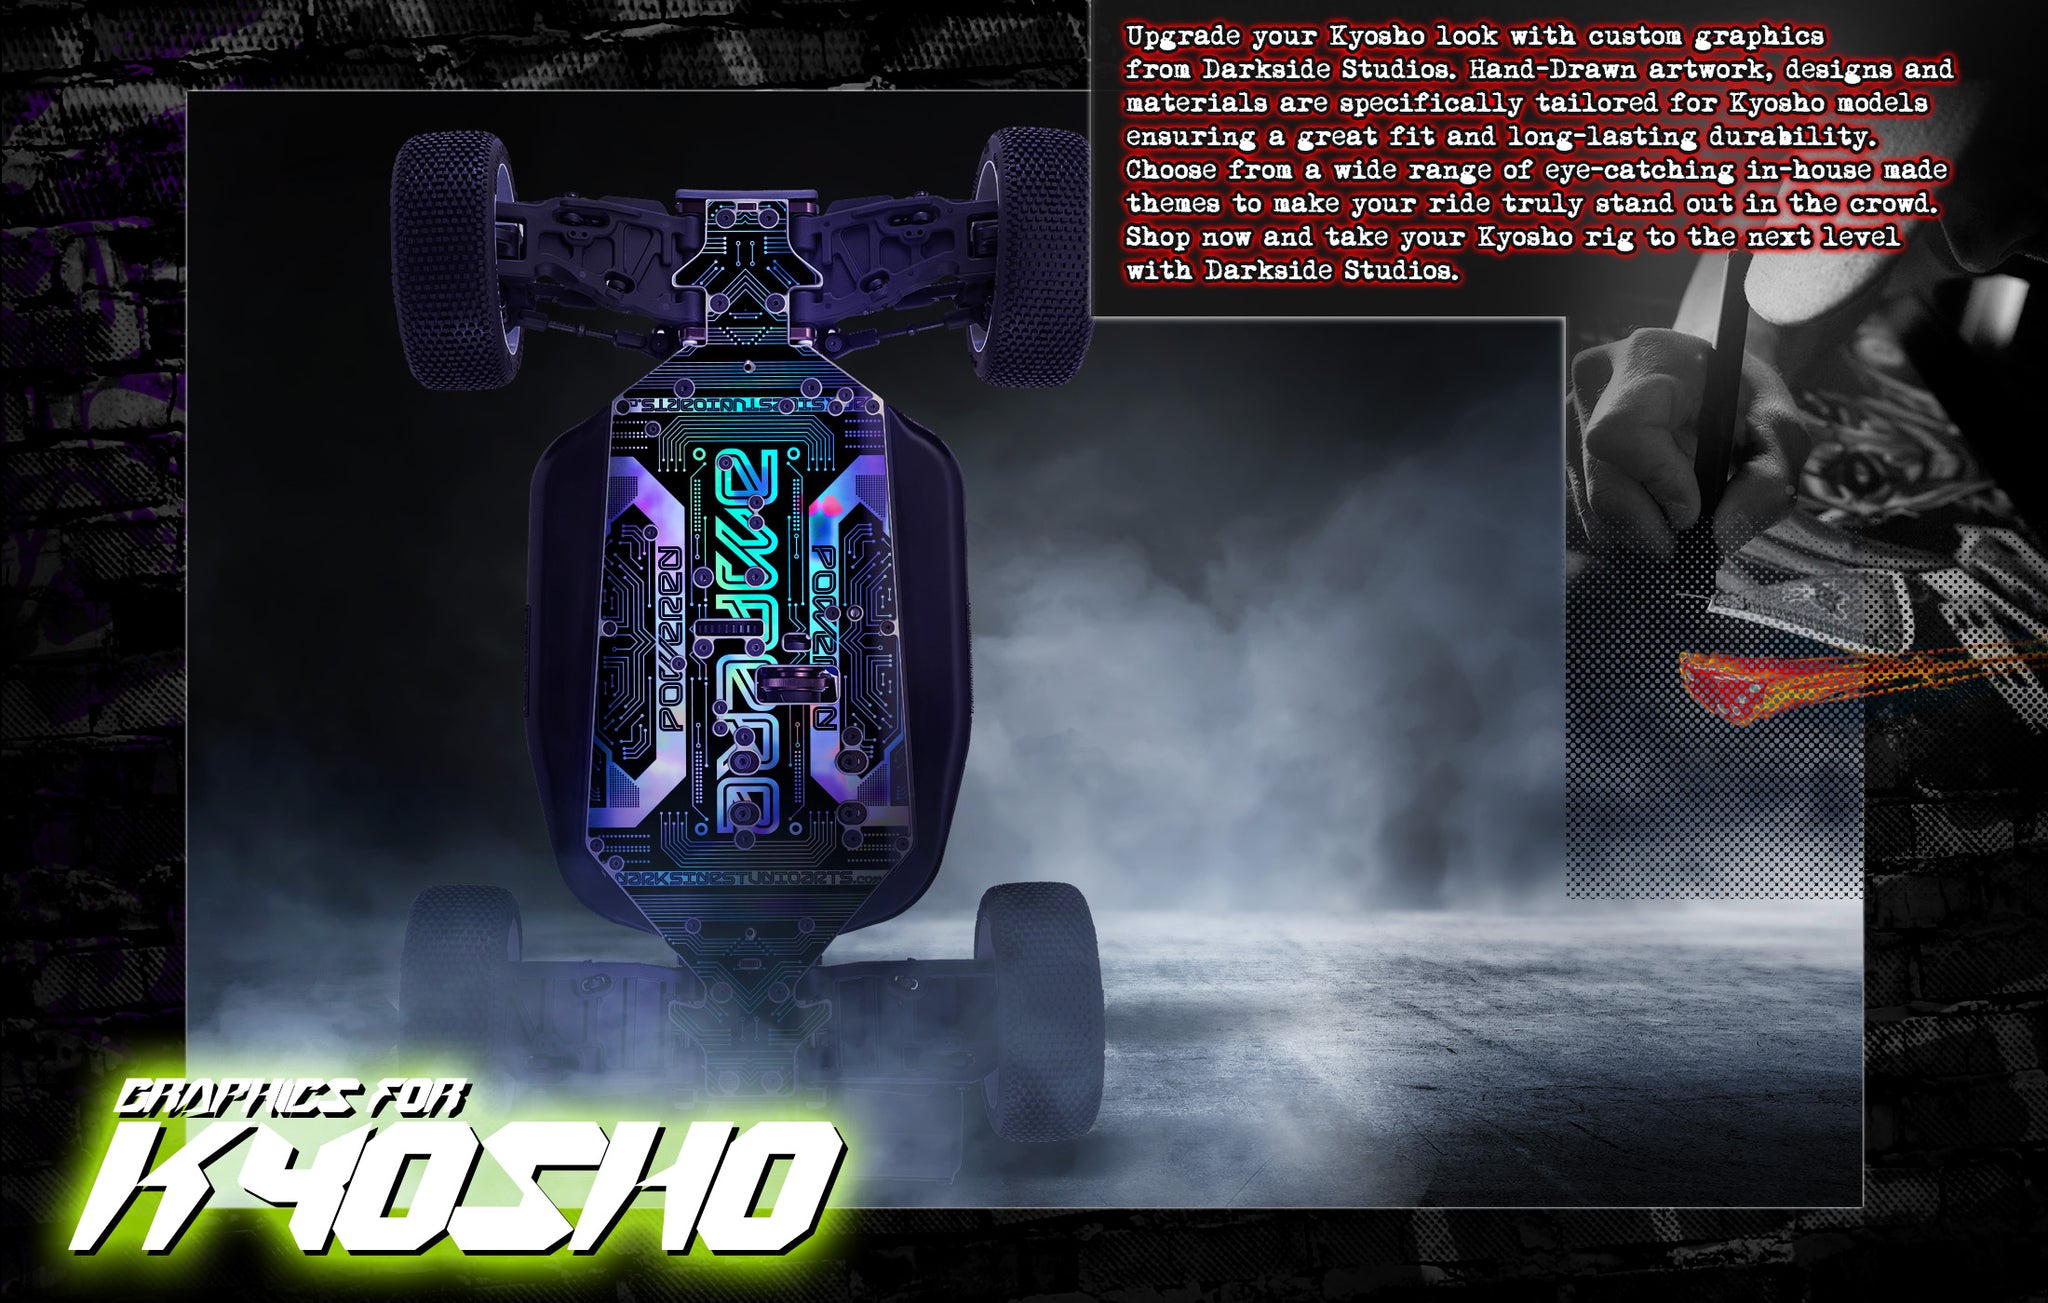 Add a touch of style and personality to your Kyosho model with Darkside Studio Arts LLC's Chassis Skin Graphics.